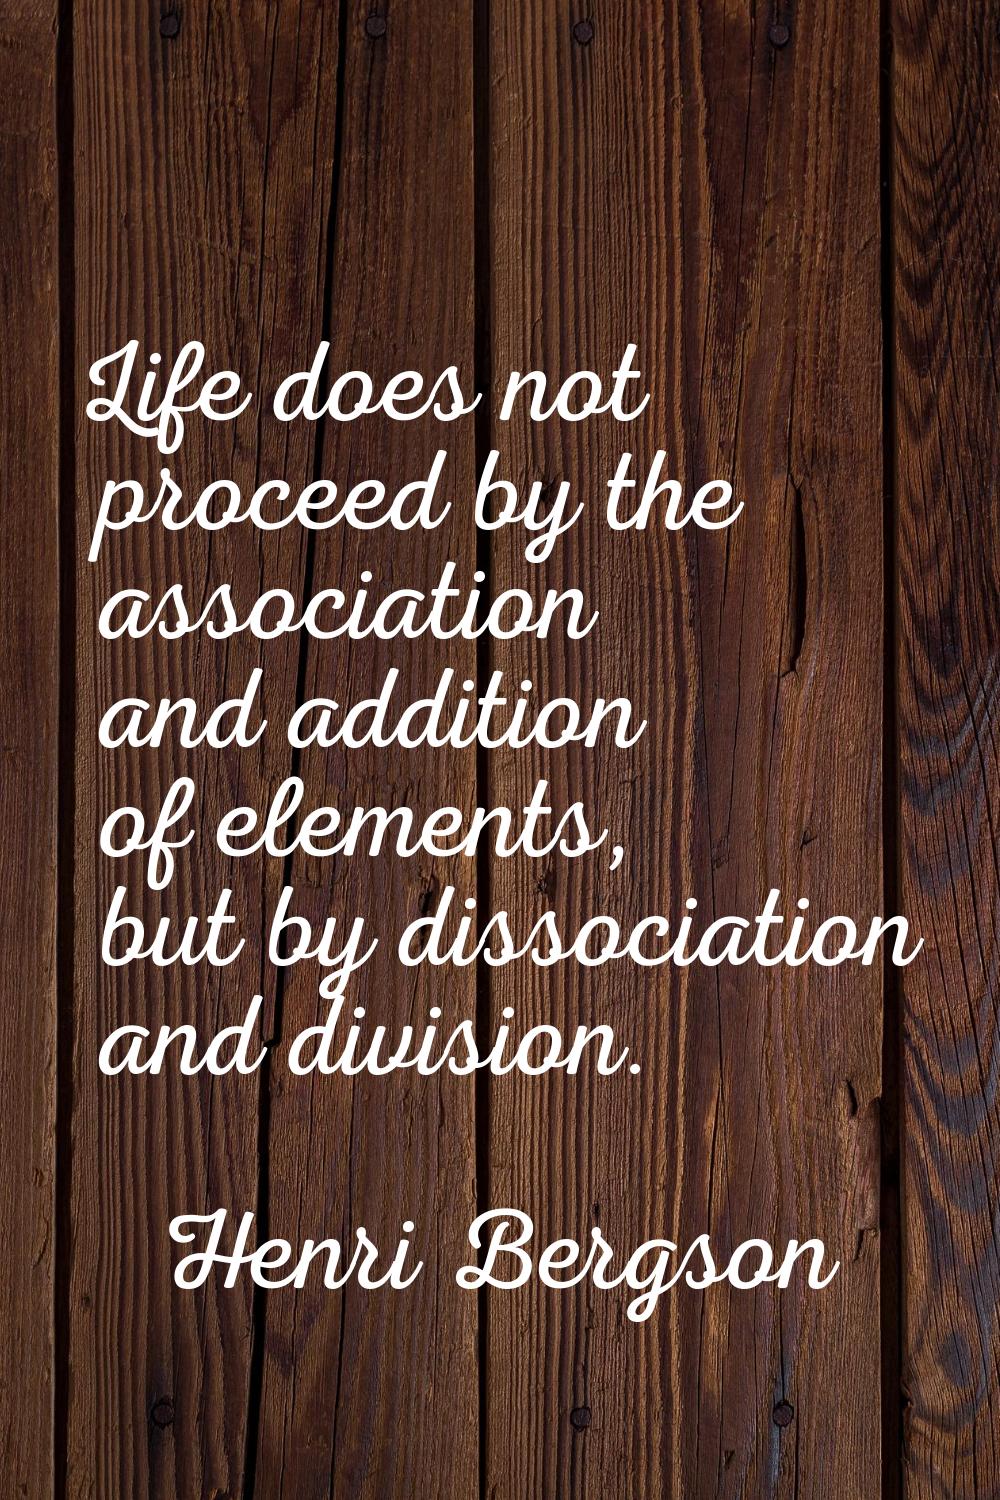 Life does not proceed by the association and addition of elements, but by dissociation and division